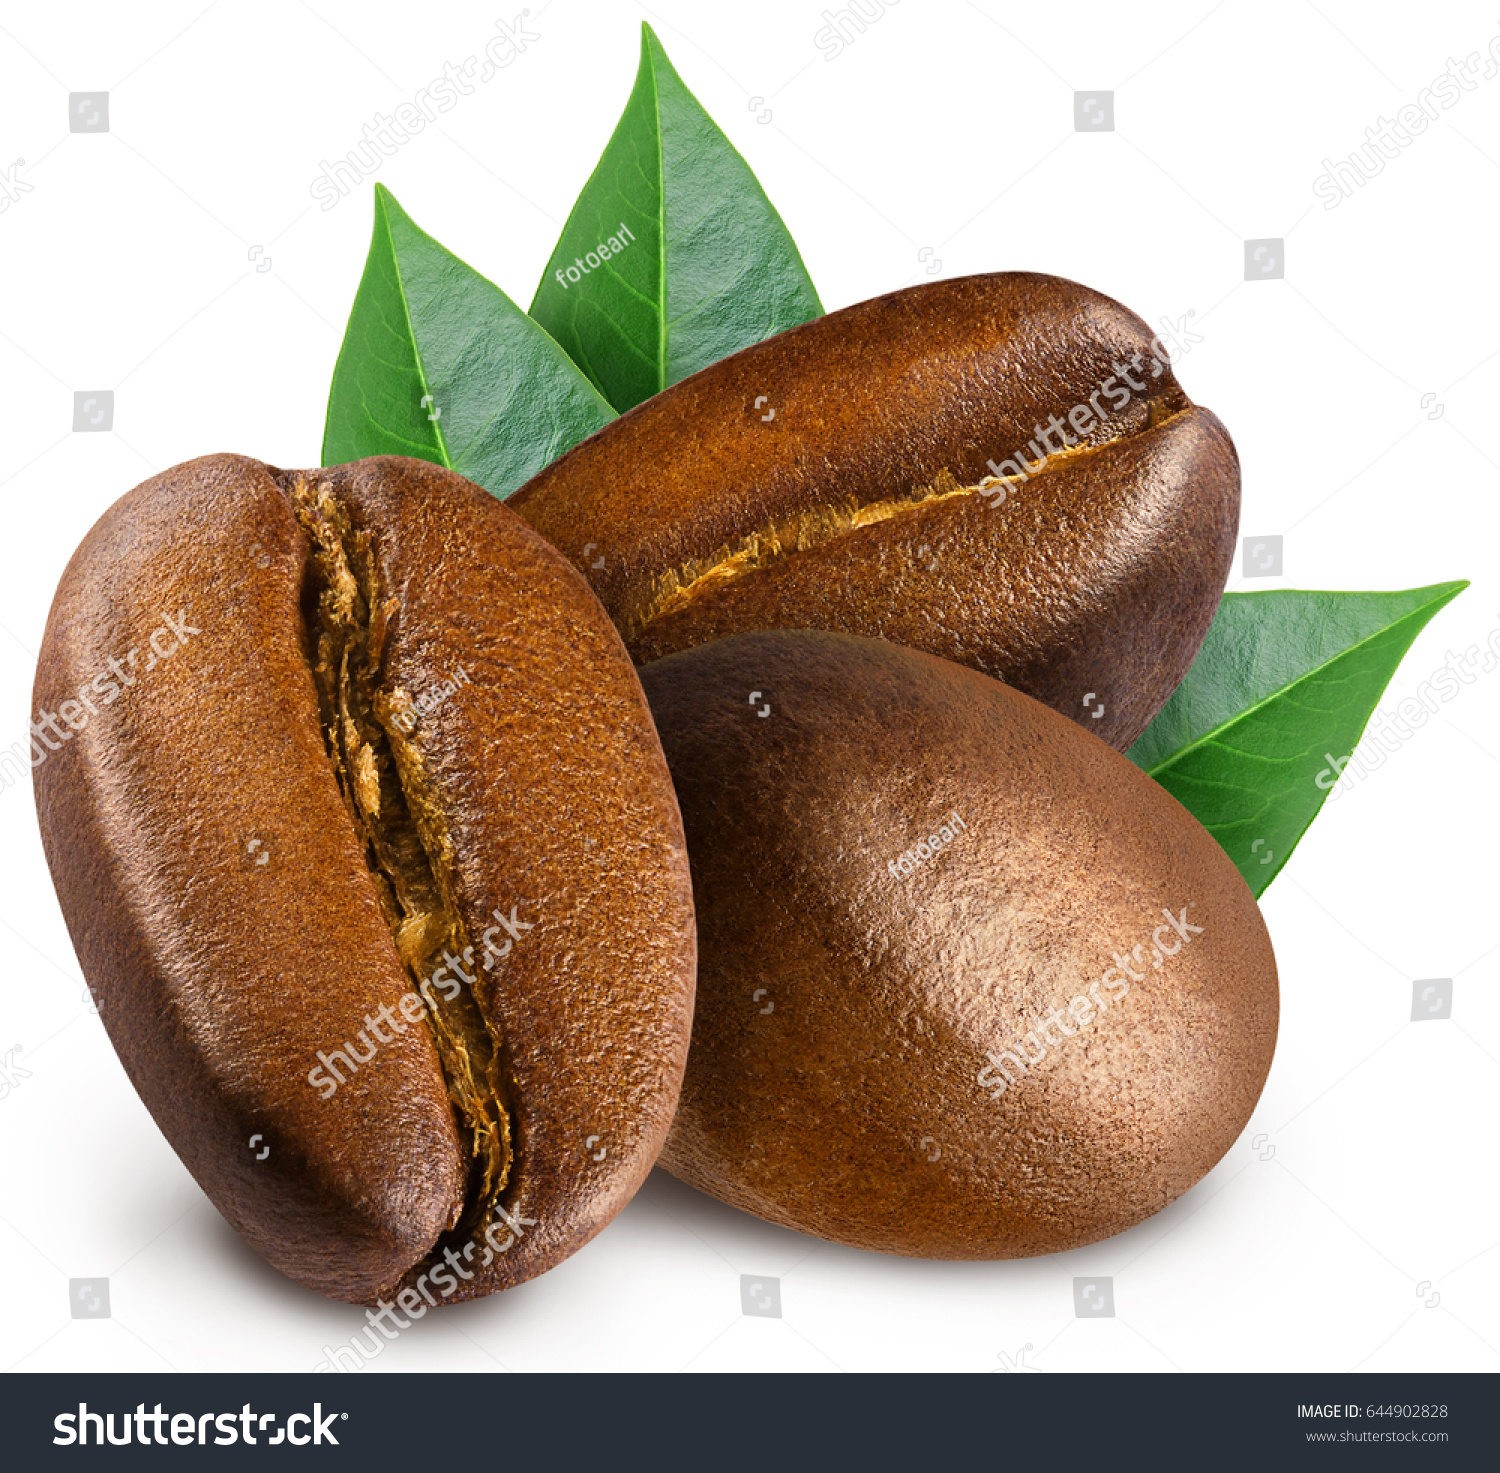 Three shiny fresh roasted coffee beans with leaves isolated on white background. #644902828